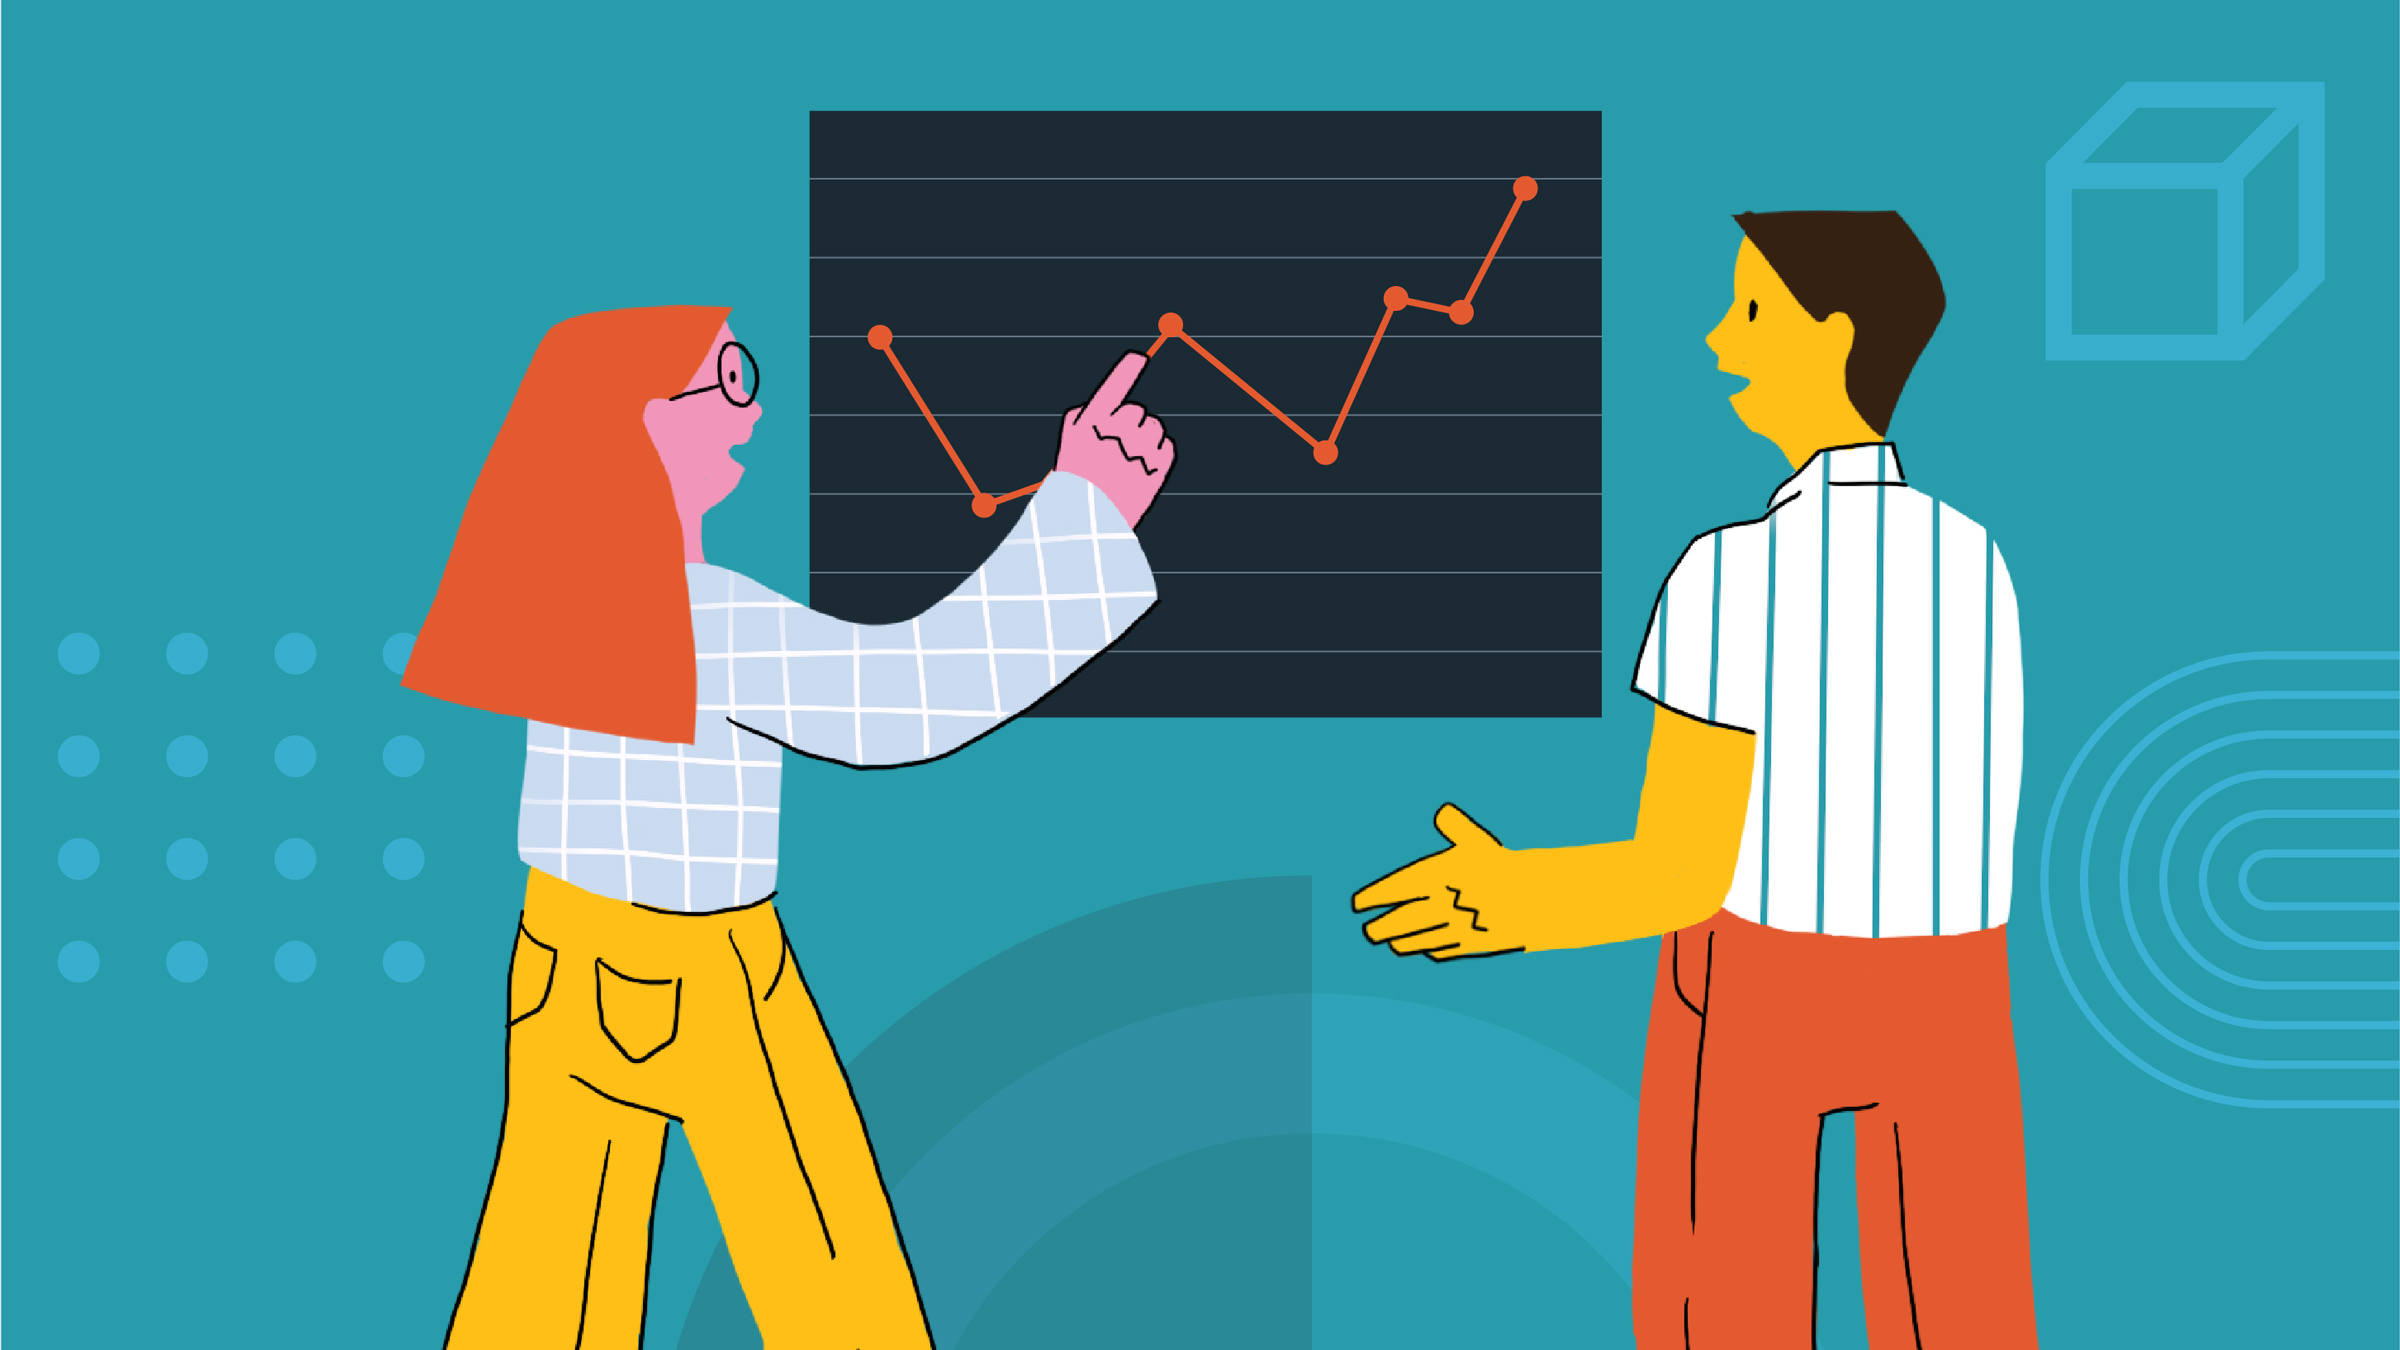 Illustration of sales and marketing team members looking at a graph